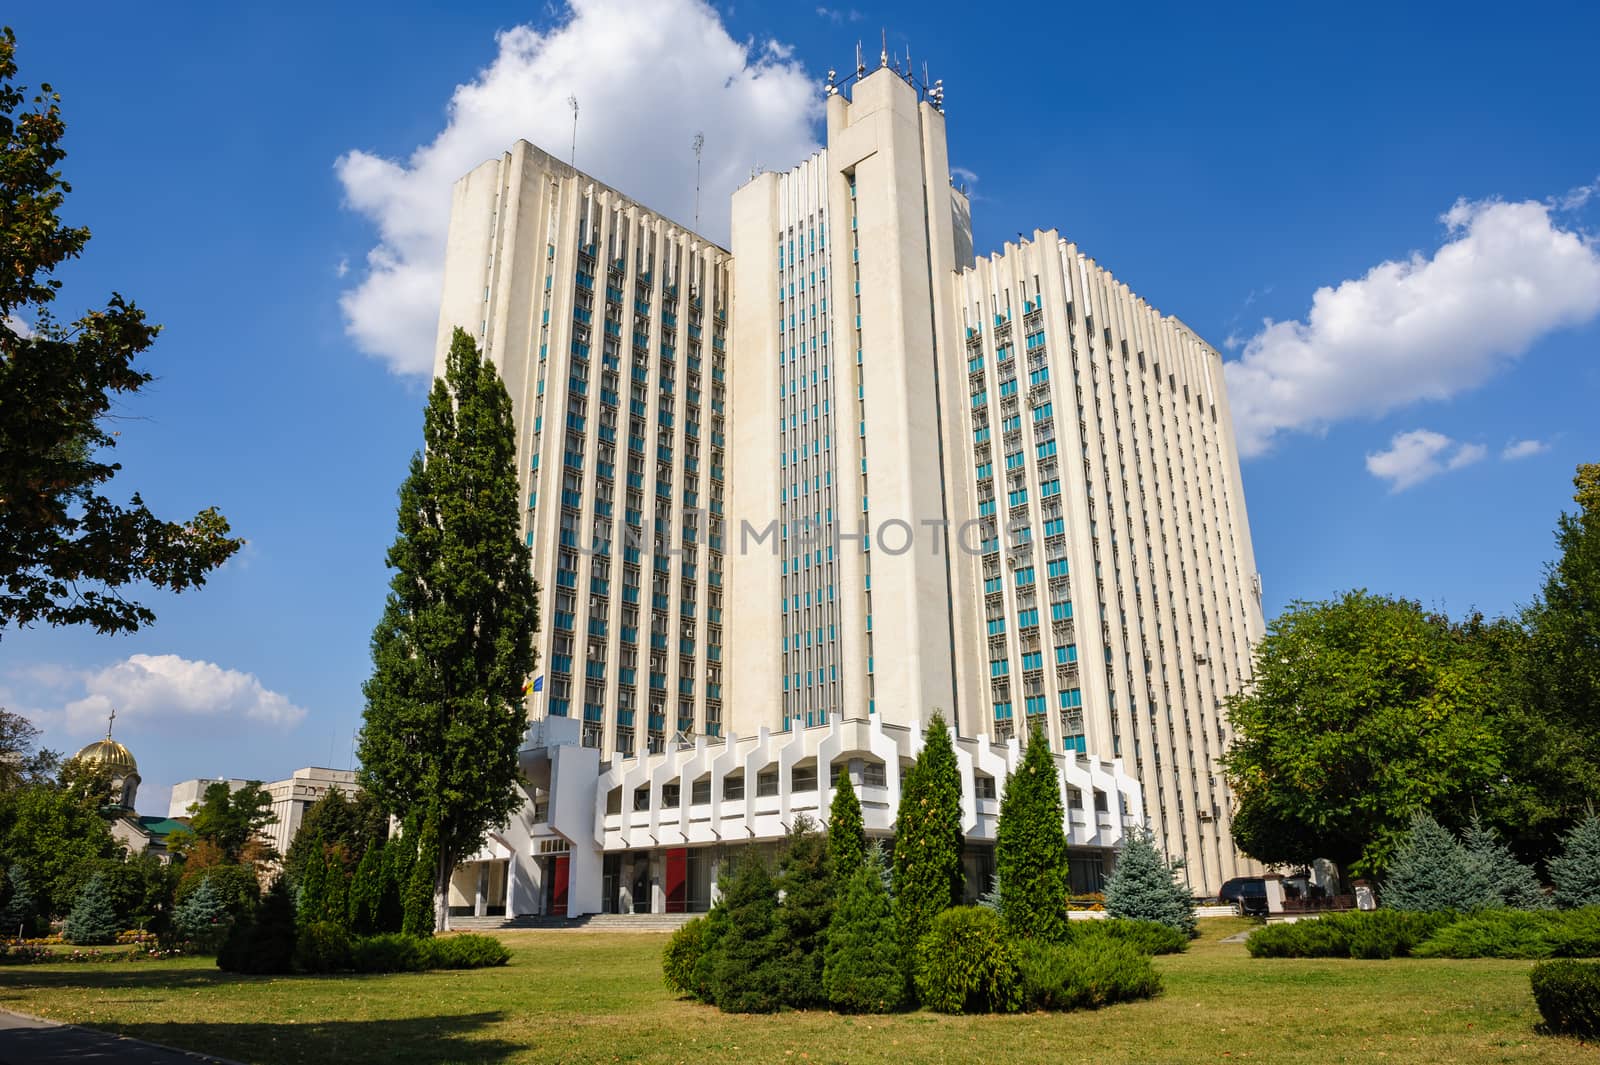 Building with offices of several ministries in Chisinau, Moldova